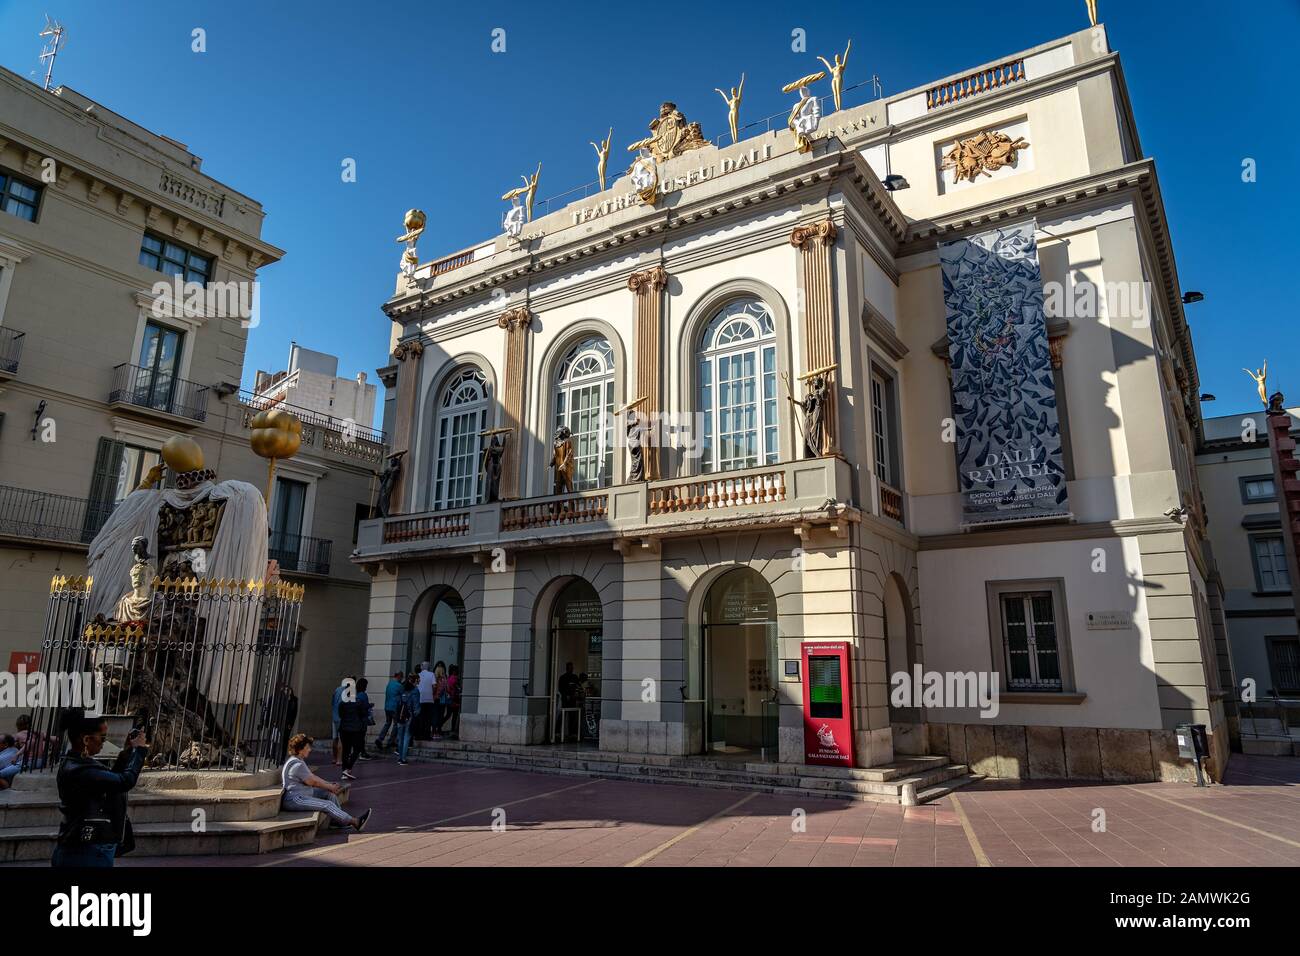 Figueres, Spanien - Salvador Dali Theater-Museum Eingang Stockfoto